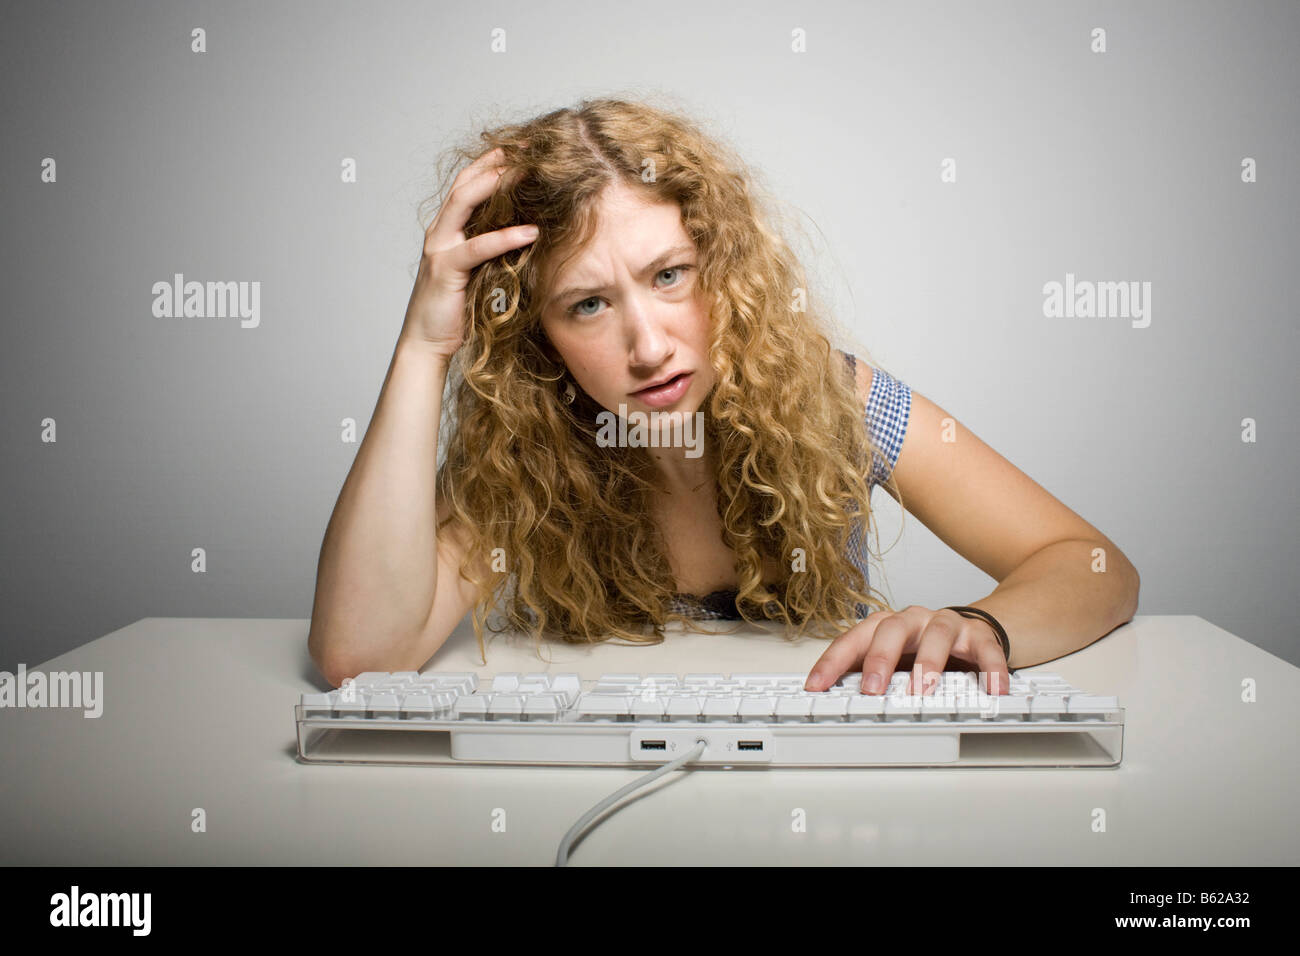 Young woman with long hair sitting frustrated behind a computer keyboard on a table Stock Photo